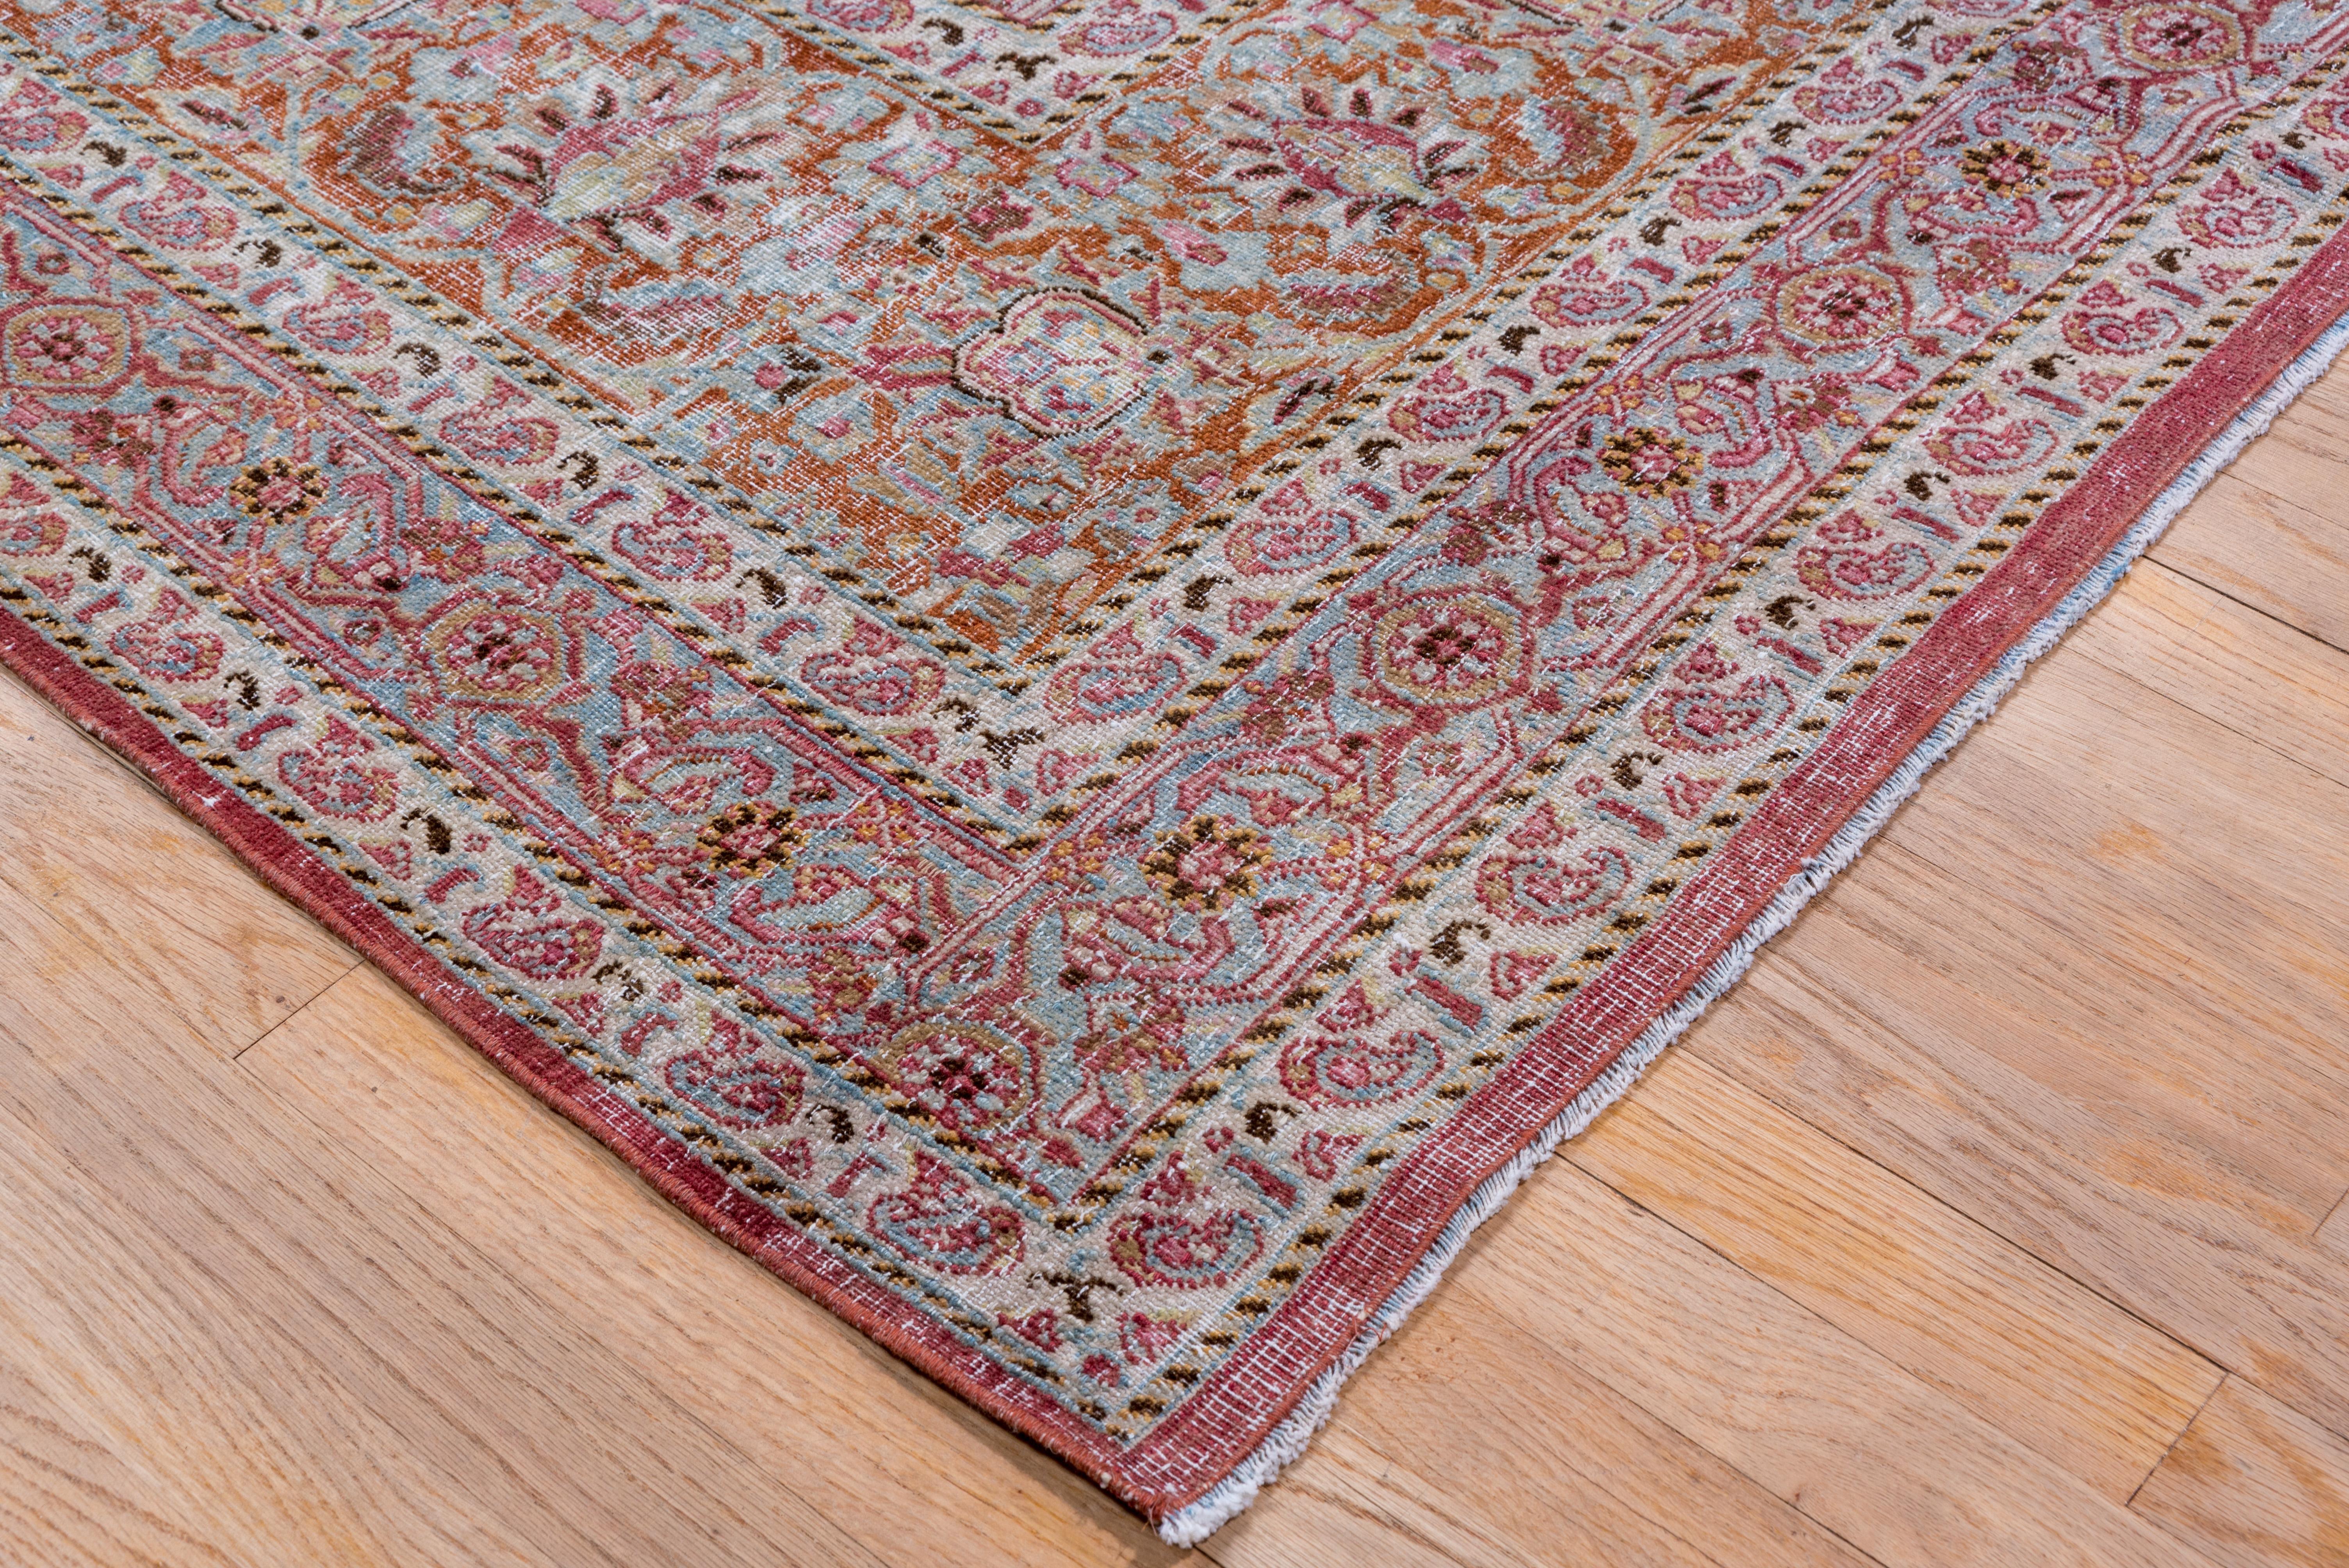 Hand-Knotted Colorful Antique Persian Khorassan Rug, Purple, Blue & Rust Accents, circa 1930s For Sale